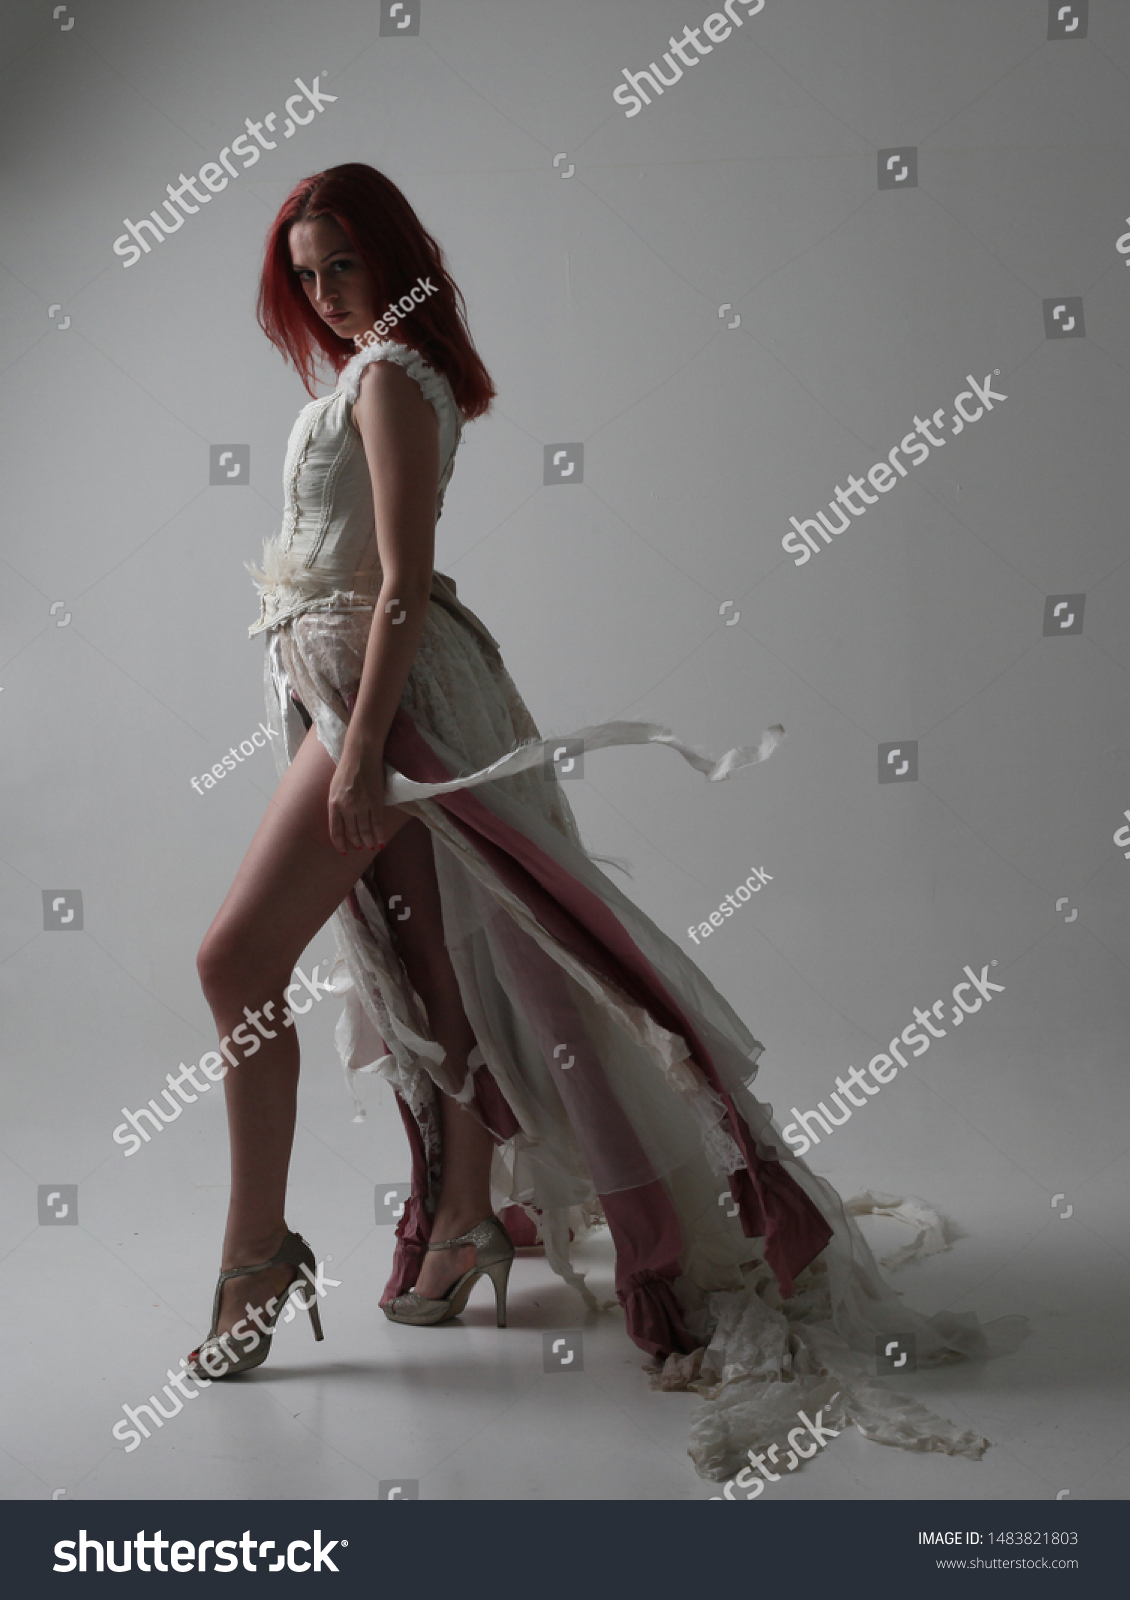 full length portrait of red haired girl wearing torn and tattered wedding dress. Standing pose against a studio background with contrasty shadow lighting. #1483821803